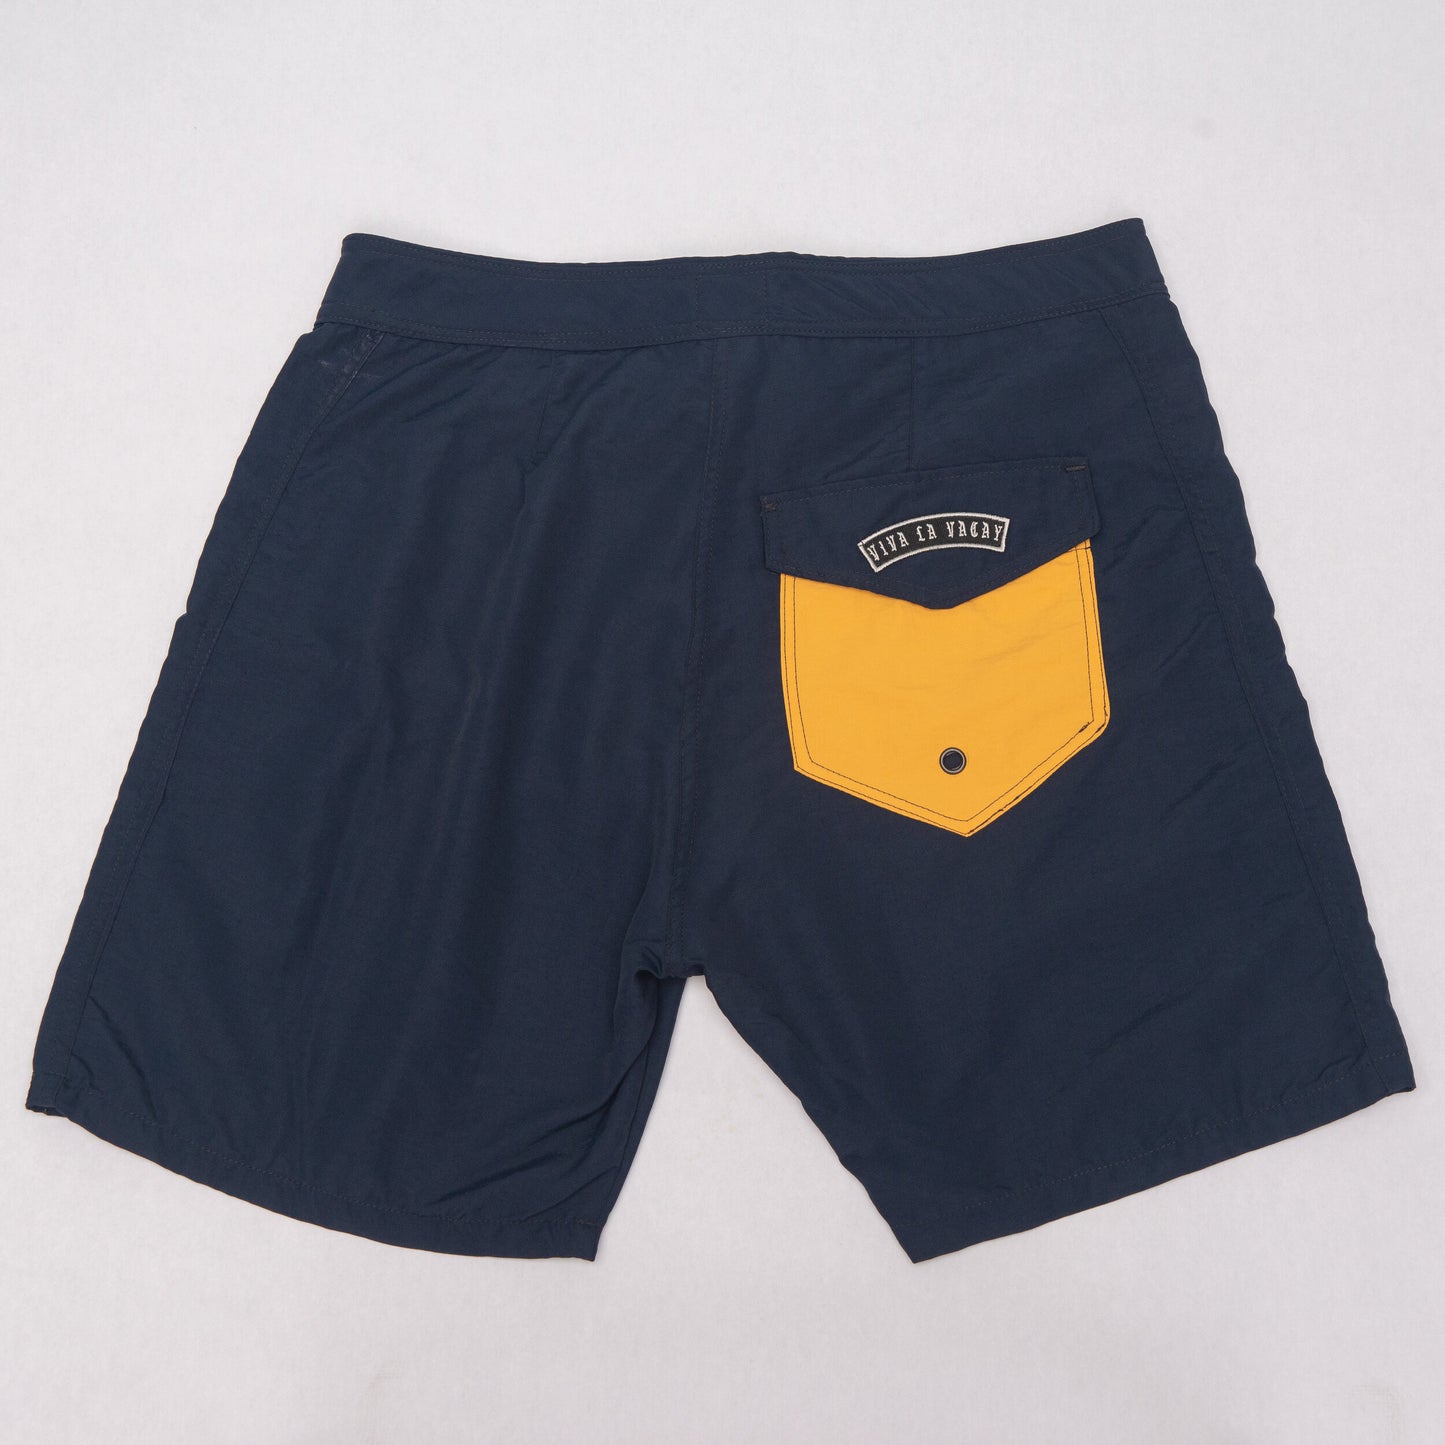 Two Tone Loggers - Gold & Navy